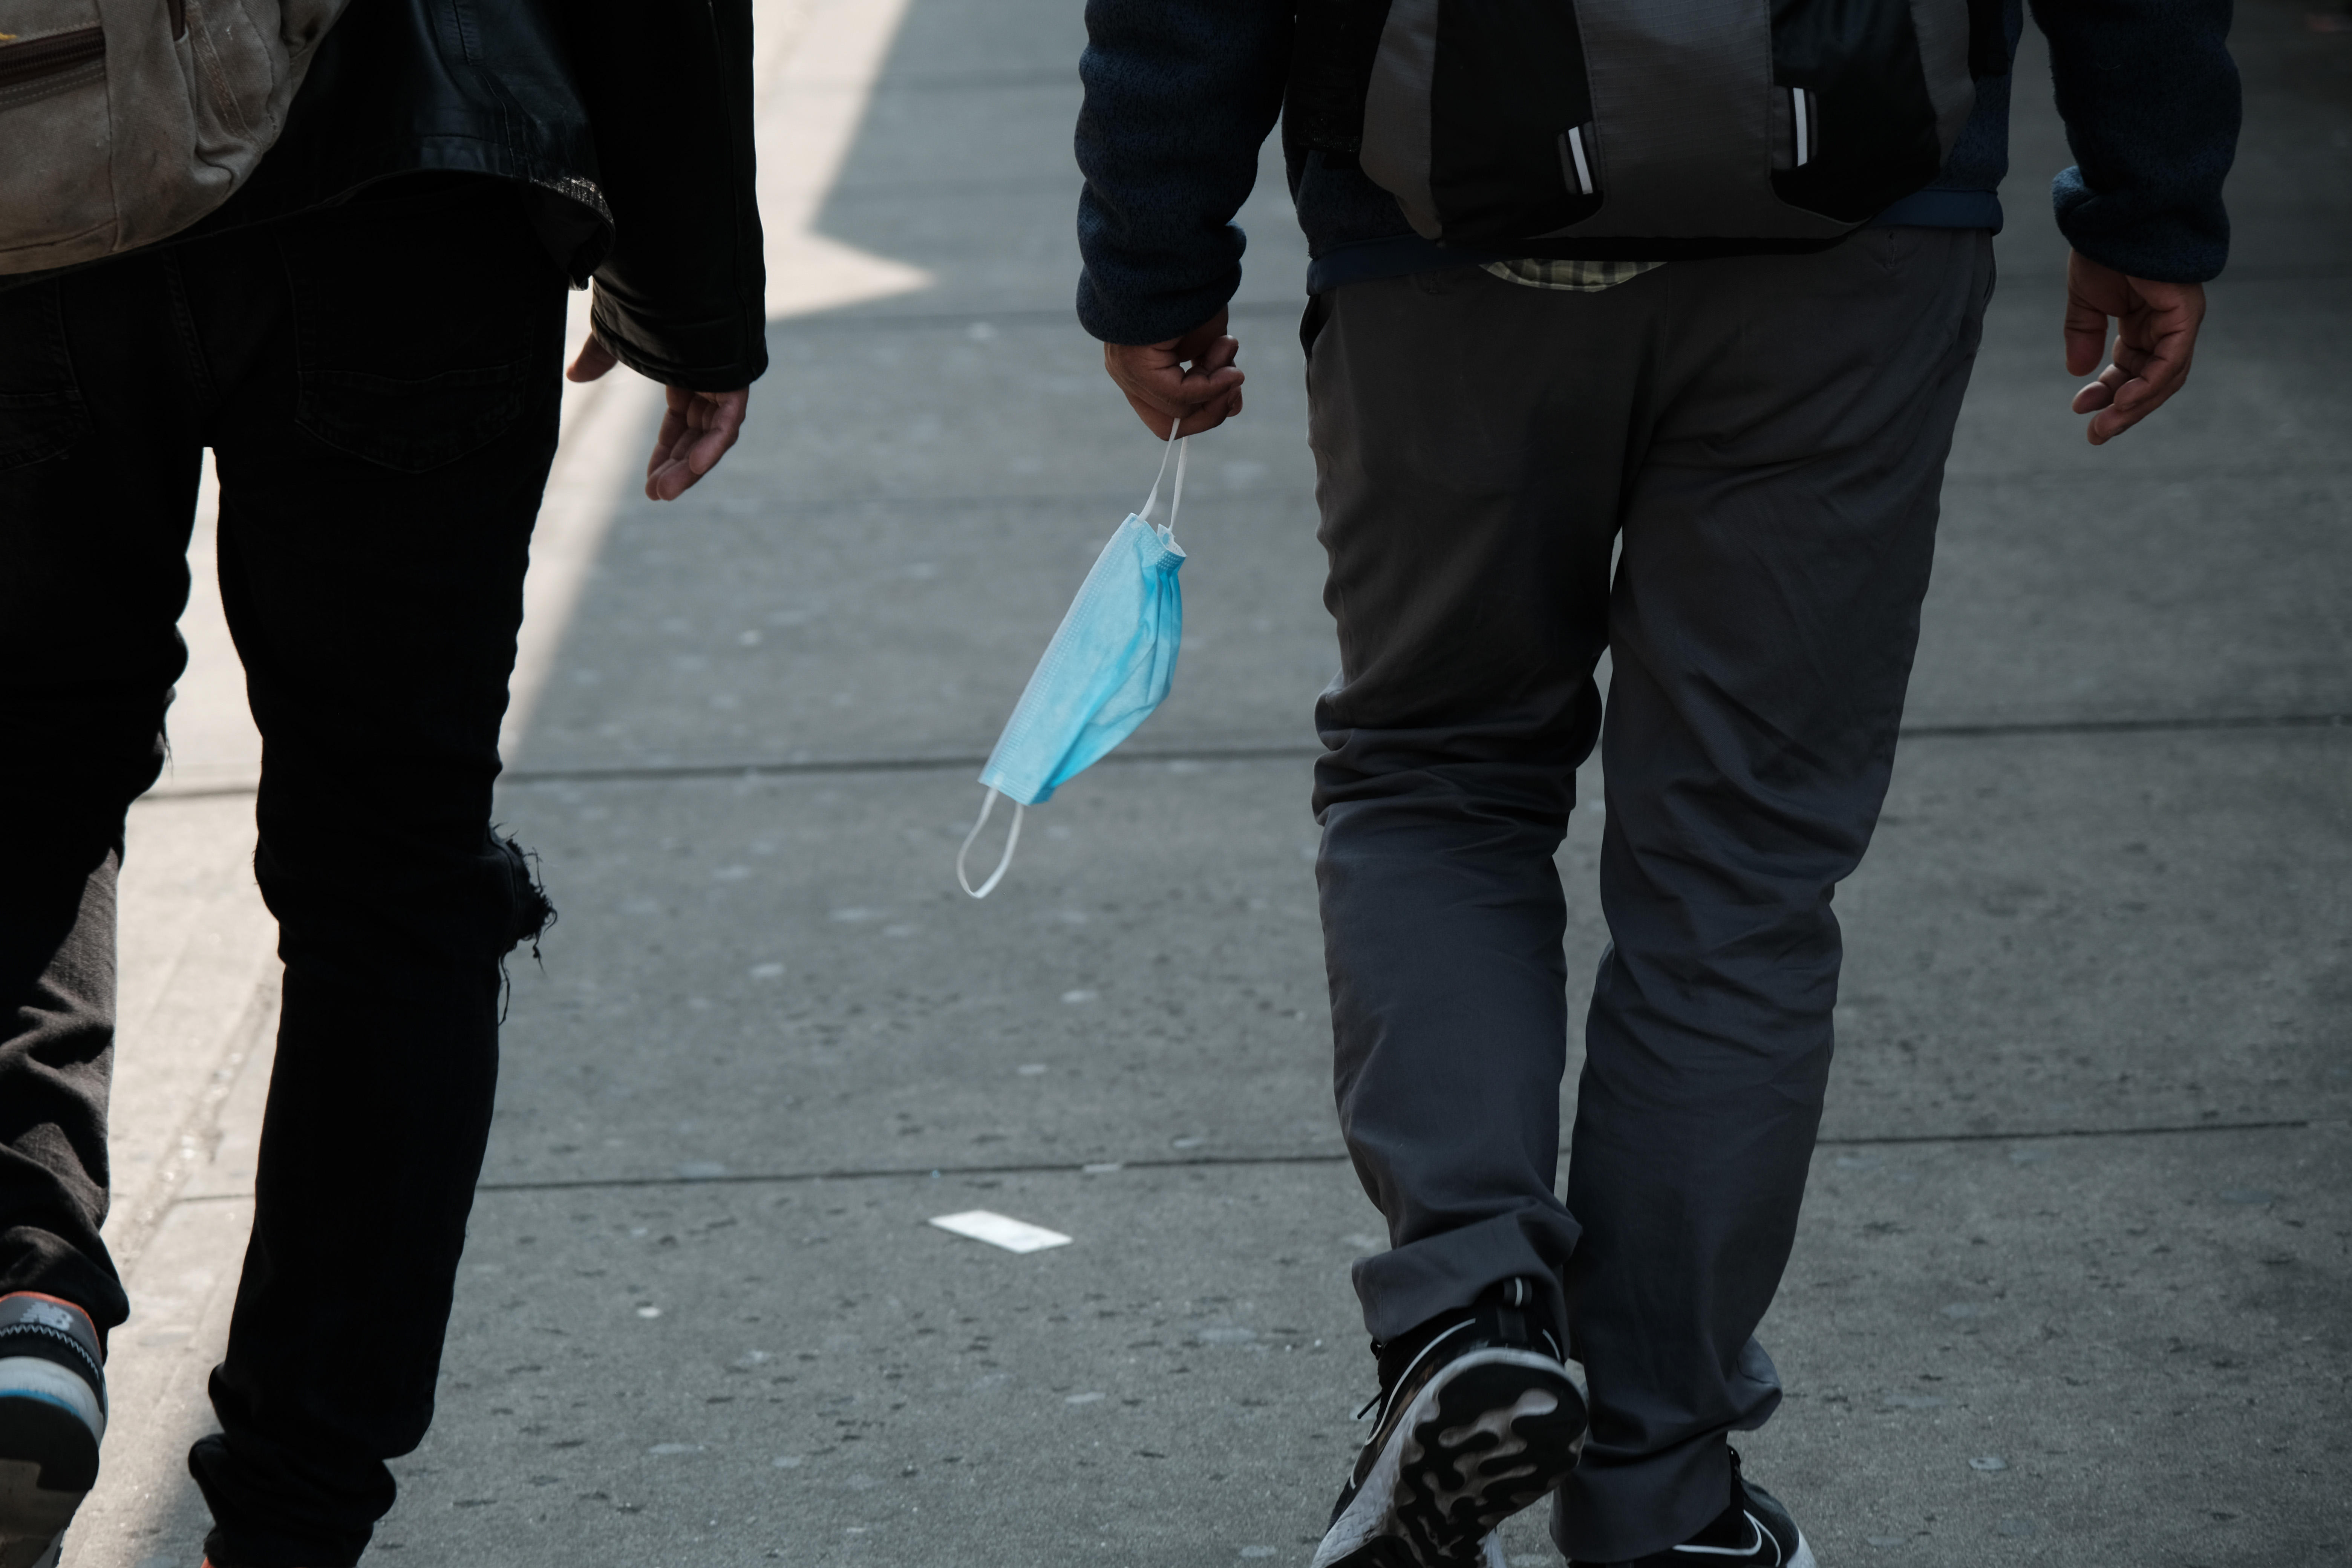 People walking on a sidewalk, one dangling a disposable face mask from their hand.